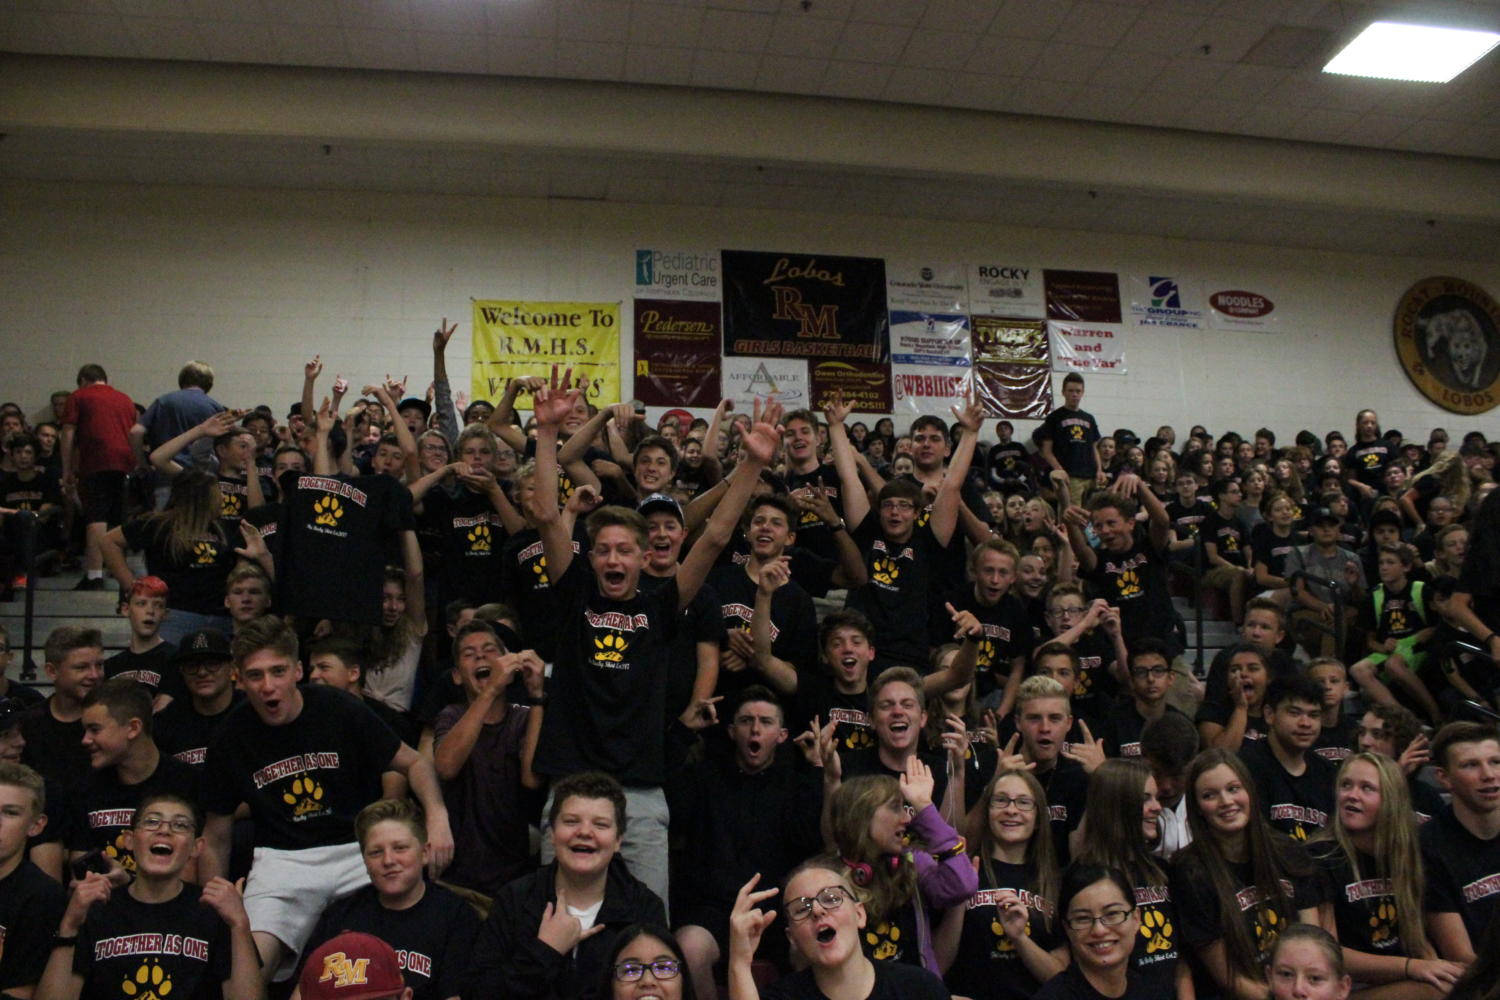 Rocky students excited for the assembly